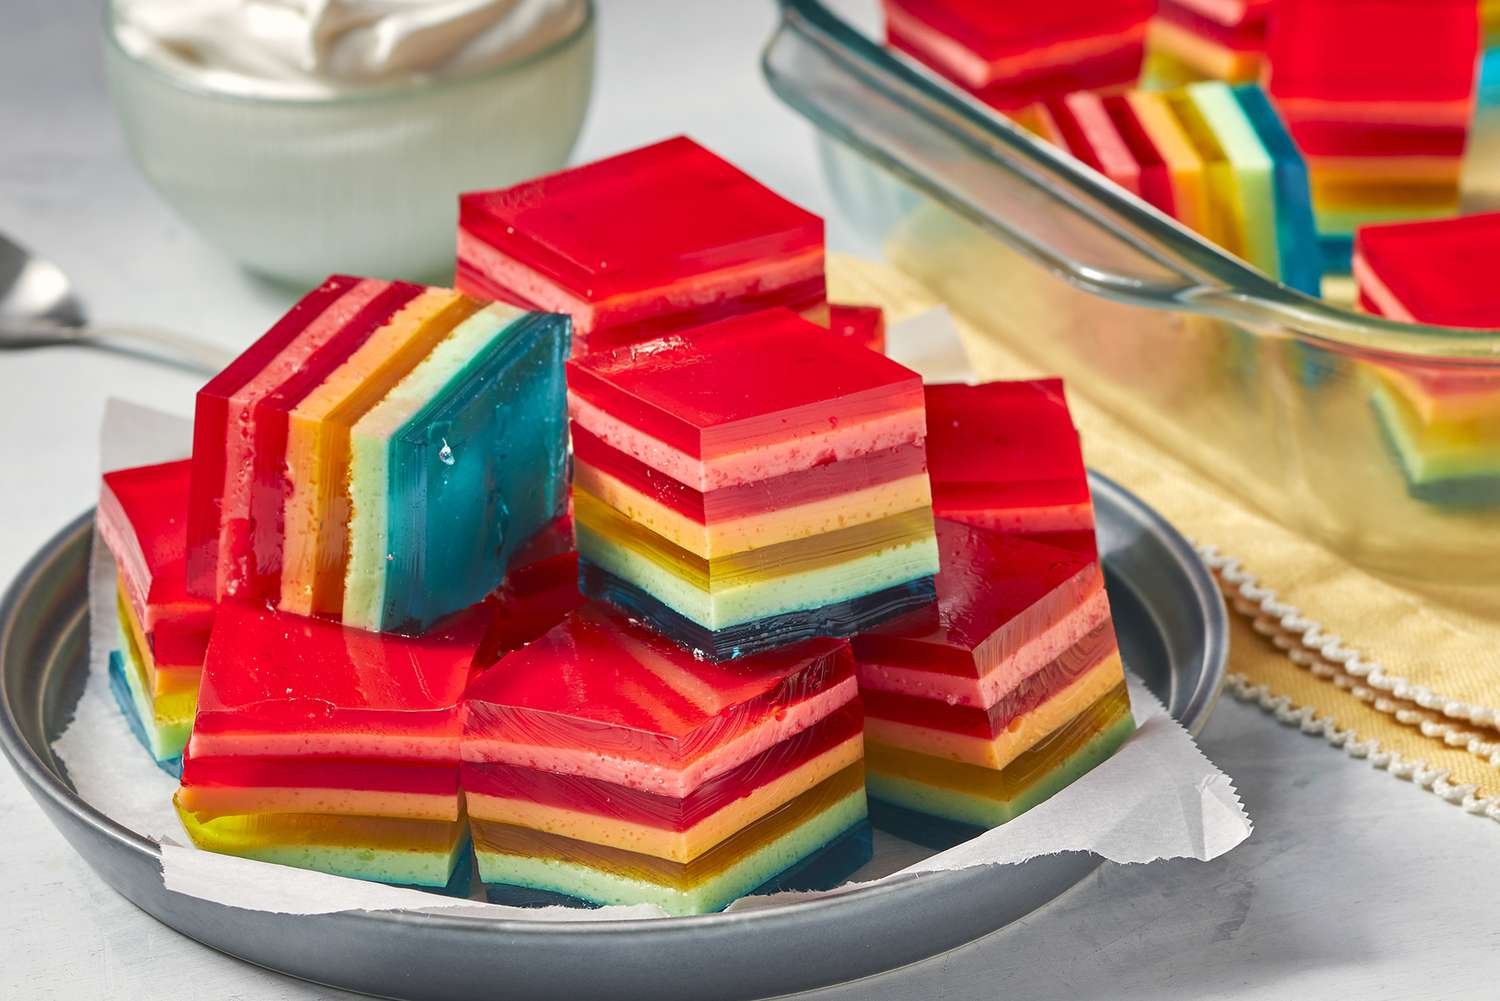 My Grandmother's Vintage Jell-O Recipes